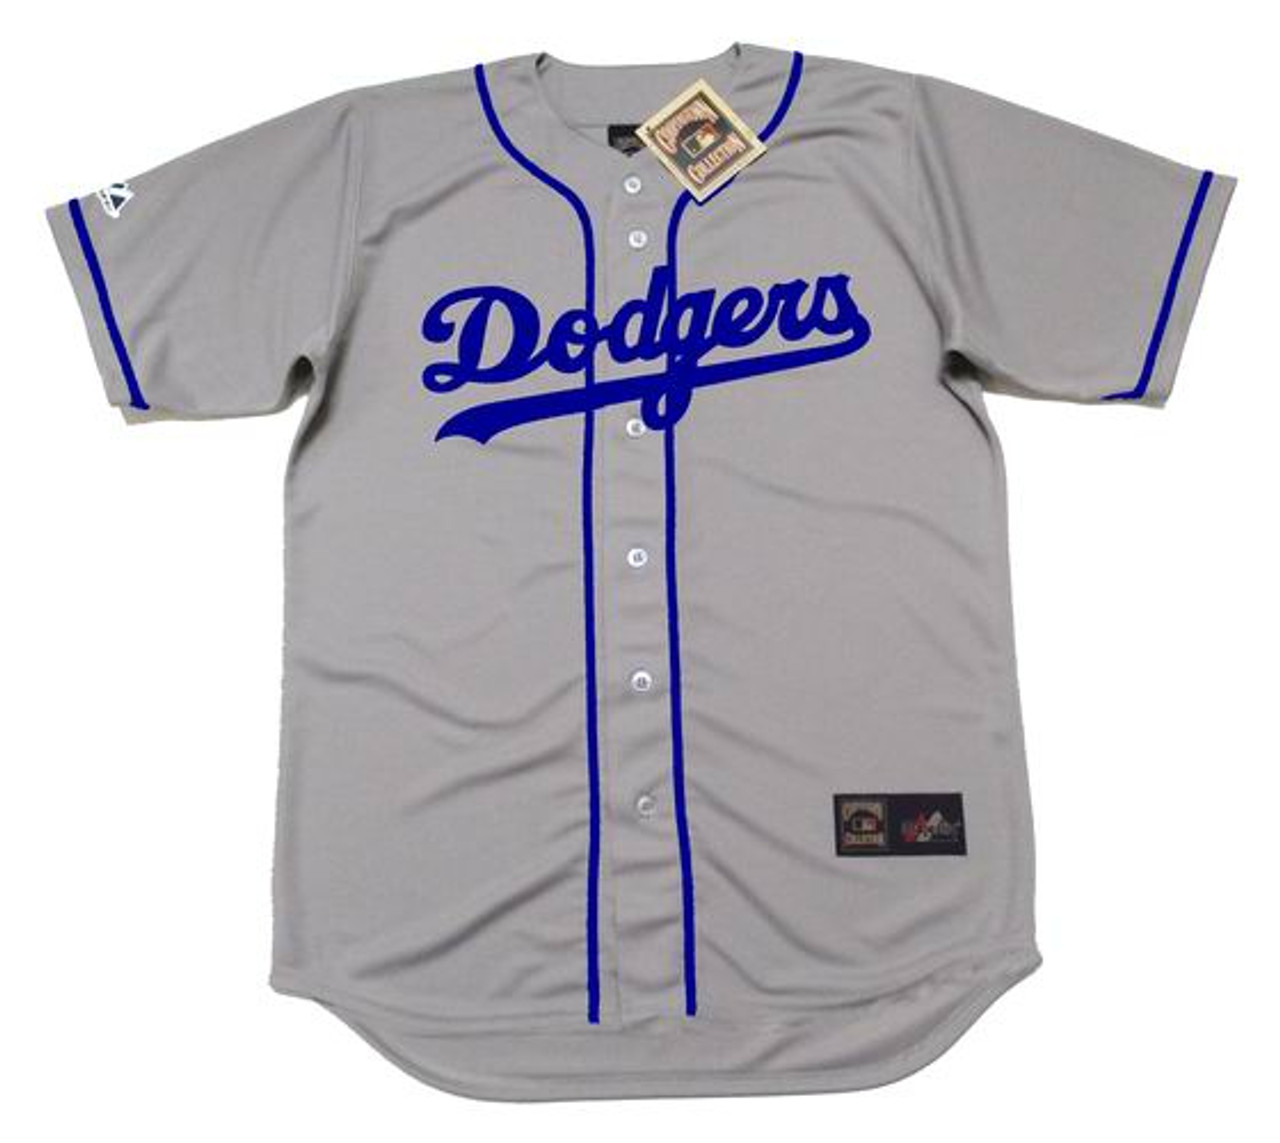 Don Drysdale Jersey - 1957 Brooklyn Dodgers Away Throwback